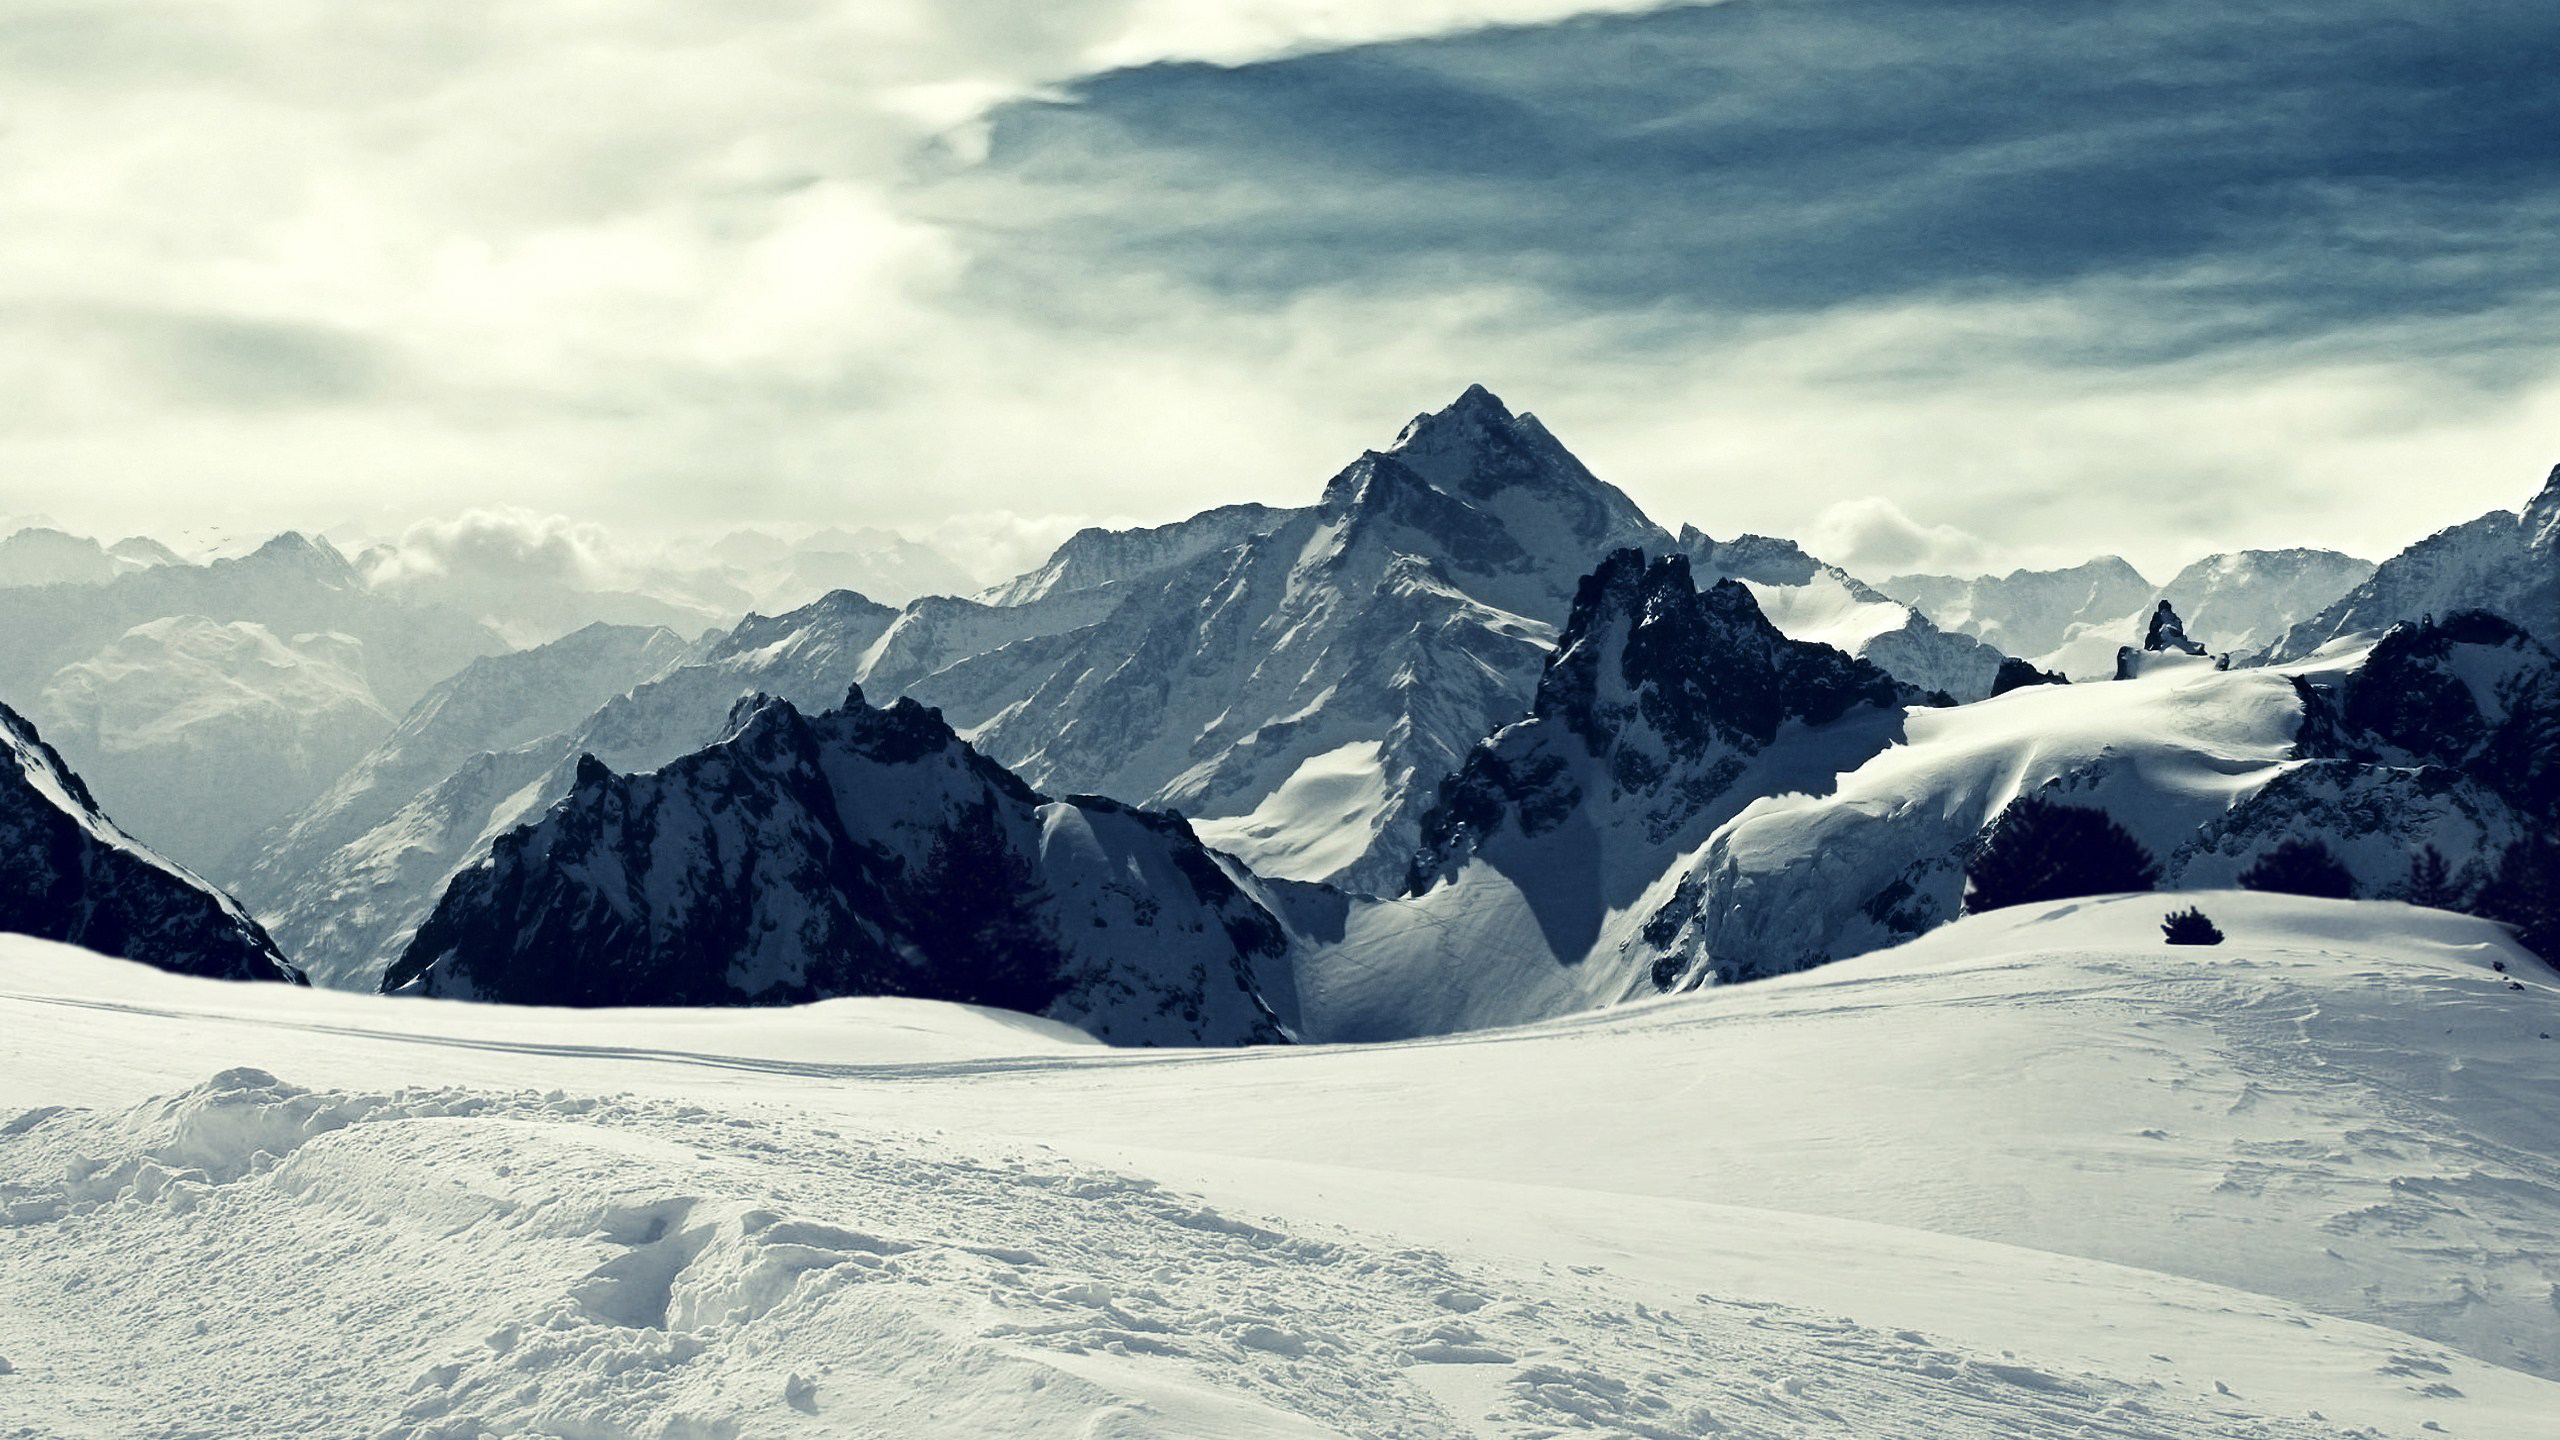 General 2560x1440 snow winter mountains nature landscape photography clouds sky cold Switzerland snowy mountain Titlis Engelberg